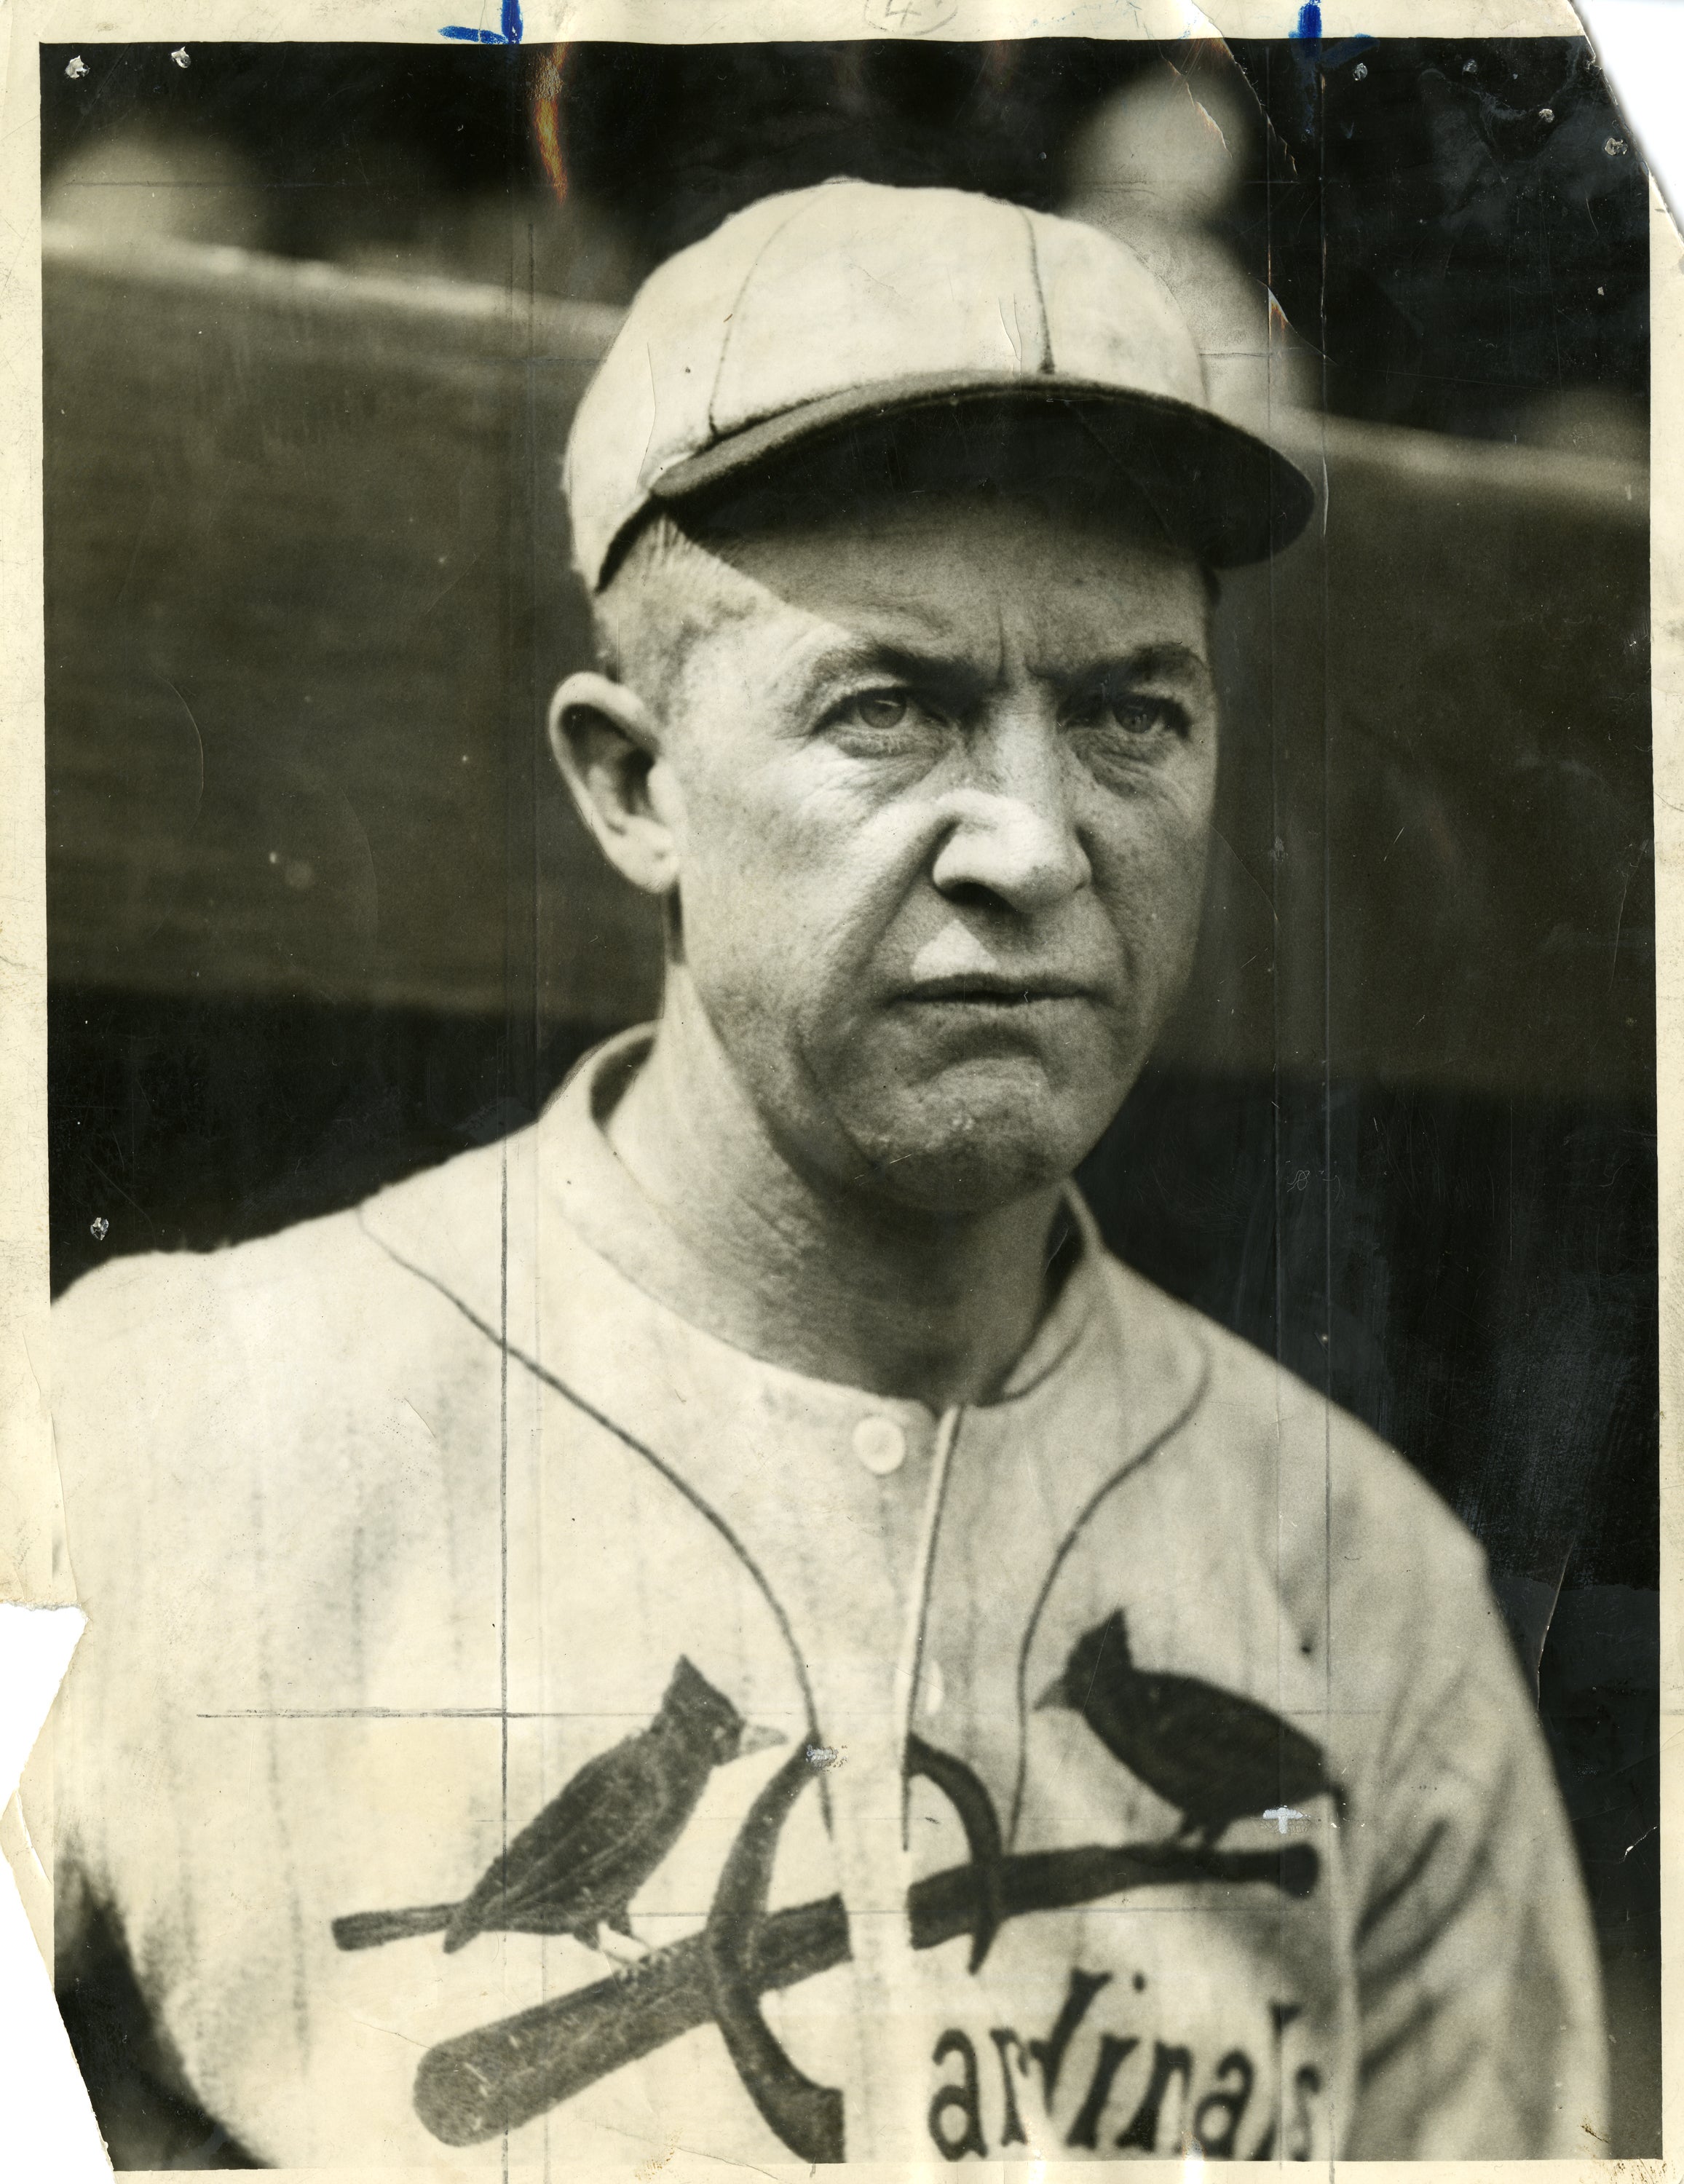 Alexander provides ultimate relief for Cardinals in 1926 World Series